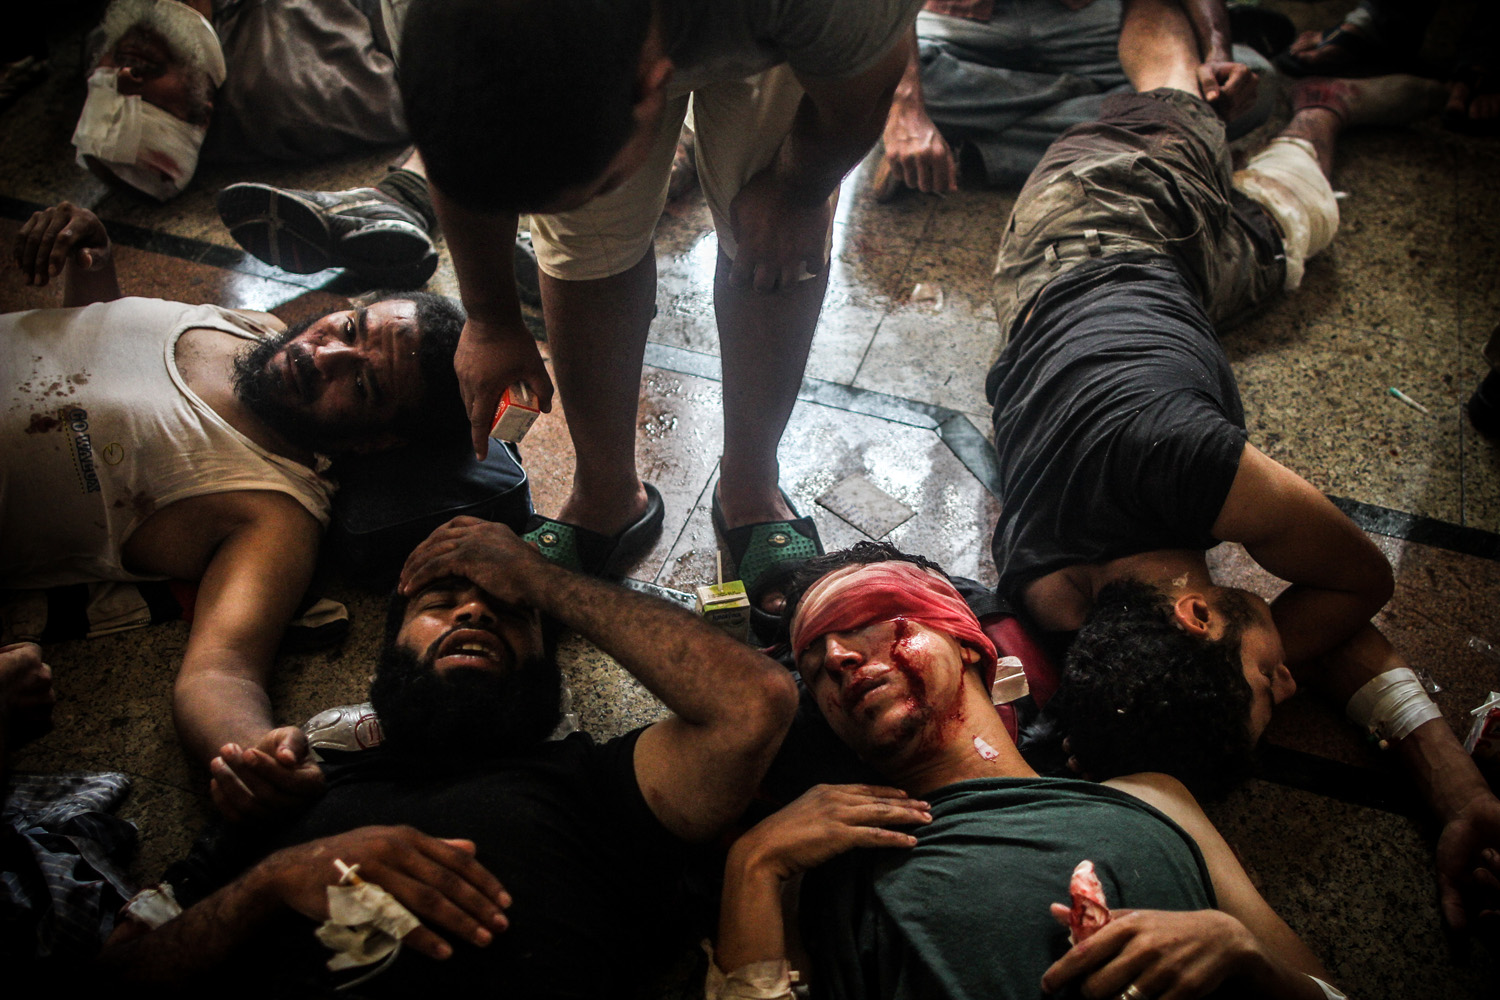 Aug. 14, 2013. A volunteer medic helps injured supporters of ousted president Mohamed Morsi who laid on the ground at a makeshift hospital during the violent dispersal of the camp by security forces.